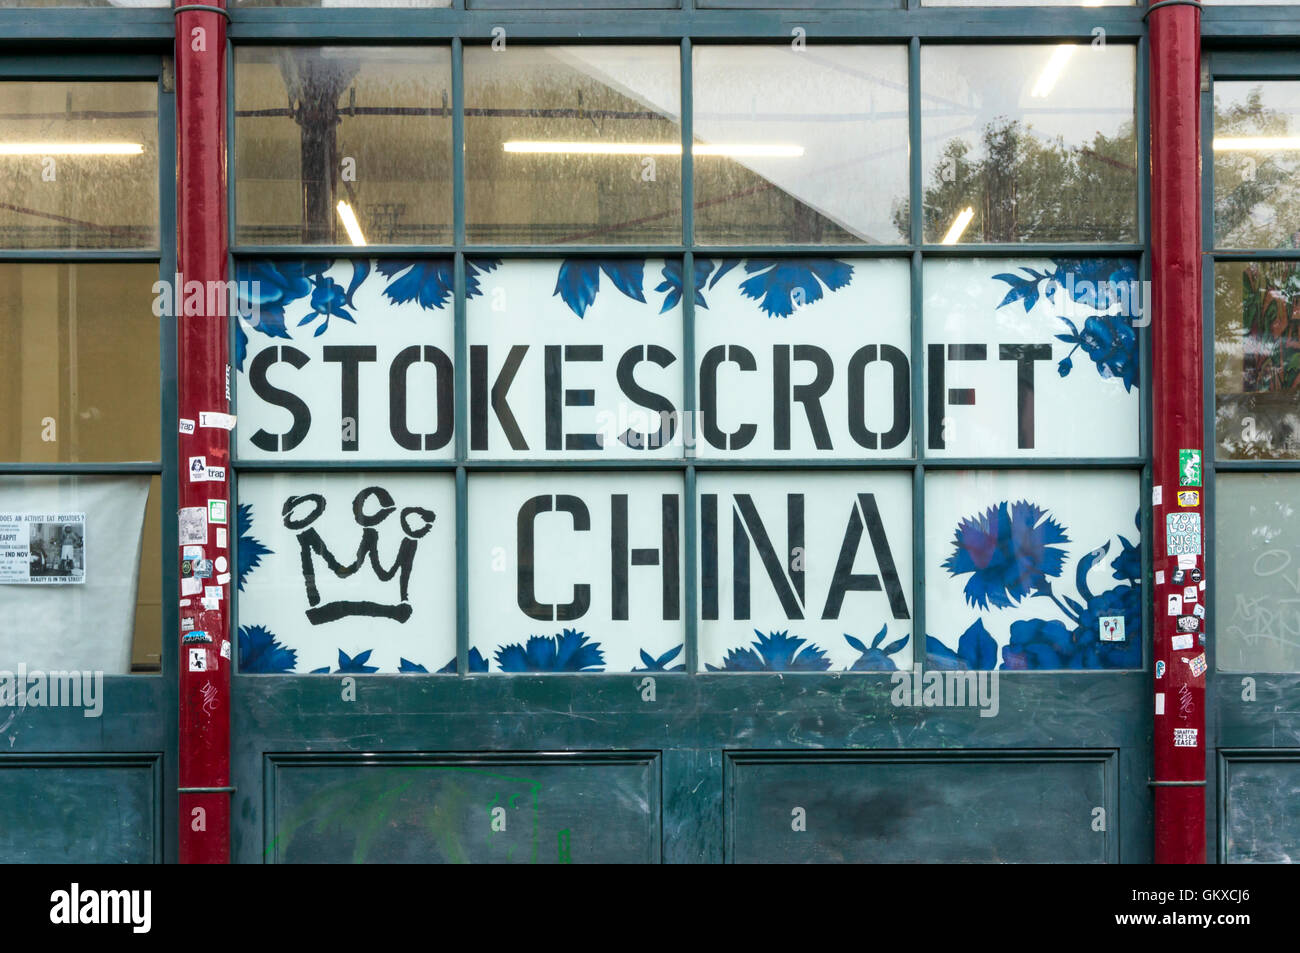 A sign for Stokes Croft China in the window of the old Jamaica St. Carriageworks in the Stokes Croft area of Bristol. Stock Photo